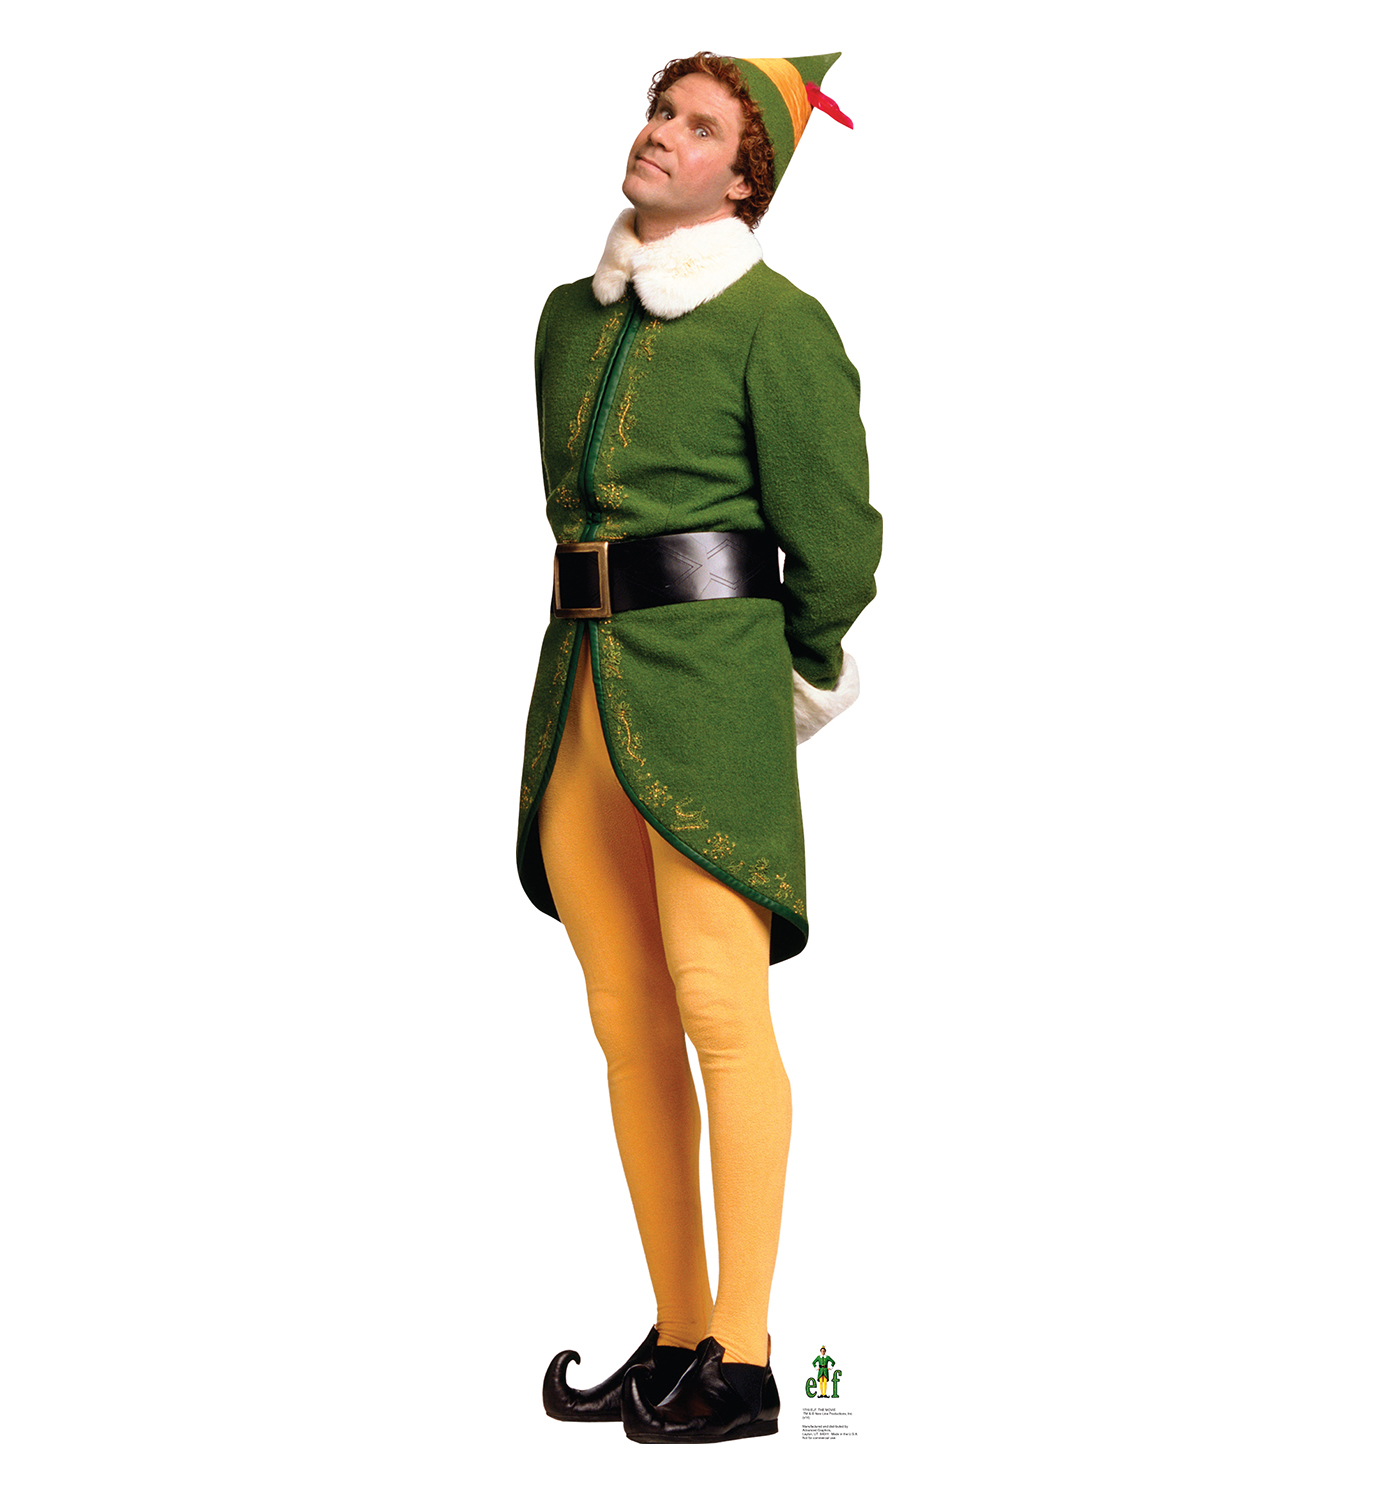 Free download Buddy The Elf Wallpaper Buddy the elf by st jimmy7484  900x579 for your Desktop Mobile  Tablet  Explore 50 Buddy The Elf  Wallpaper  Elf Wallpaper Buddy Holly Wallpaper